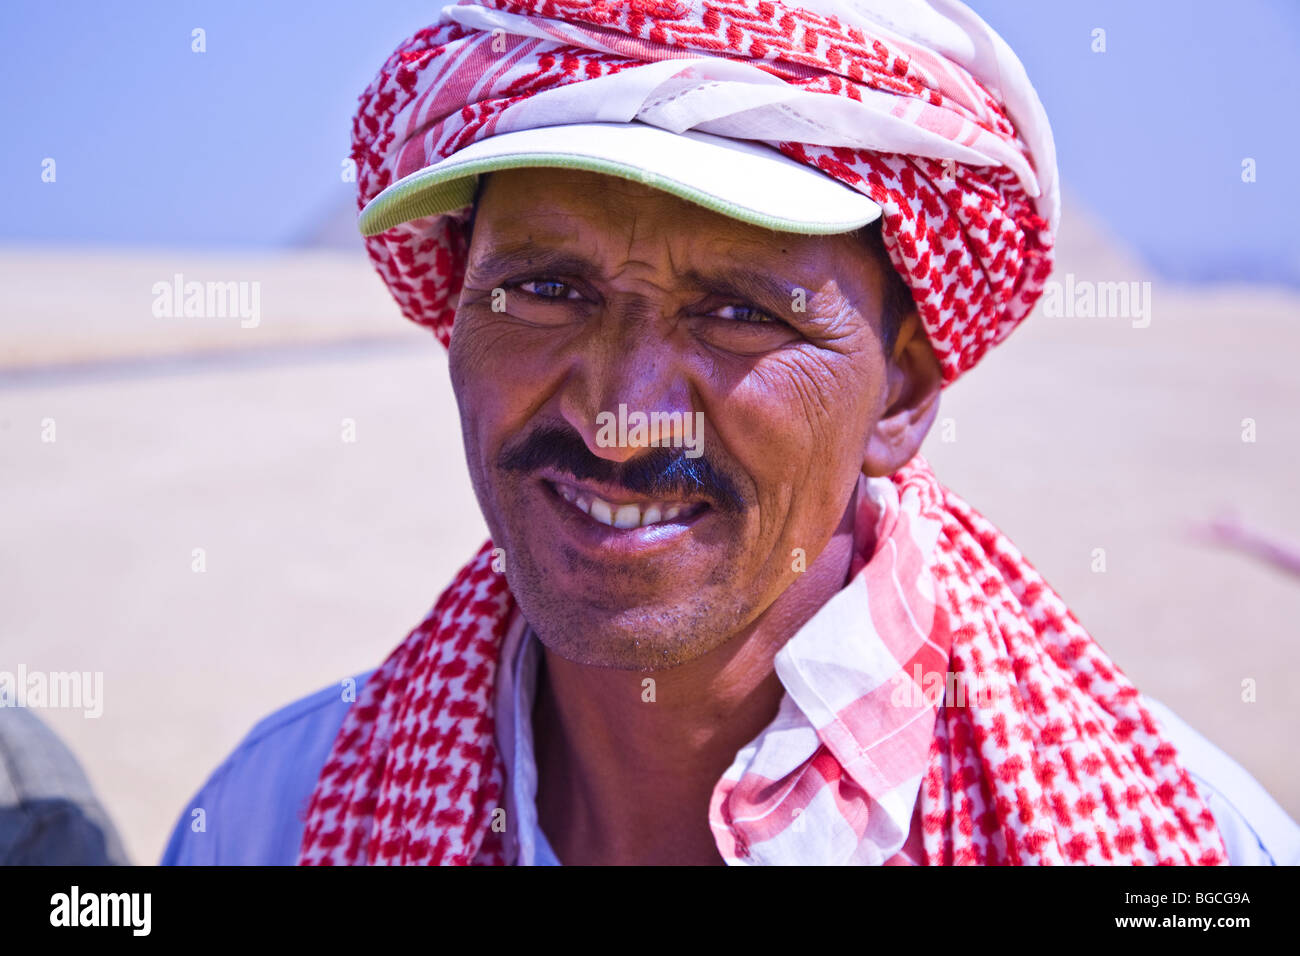 A close up of an Egyptian male camel driver who gives camel rides at the Pyramids of Giza in Egypt Stock Photo